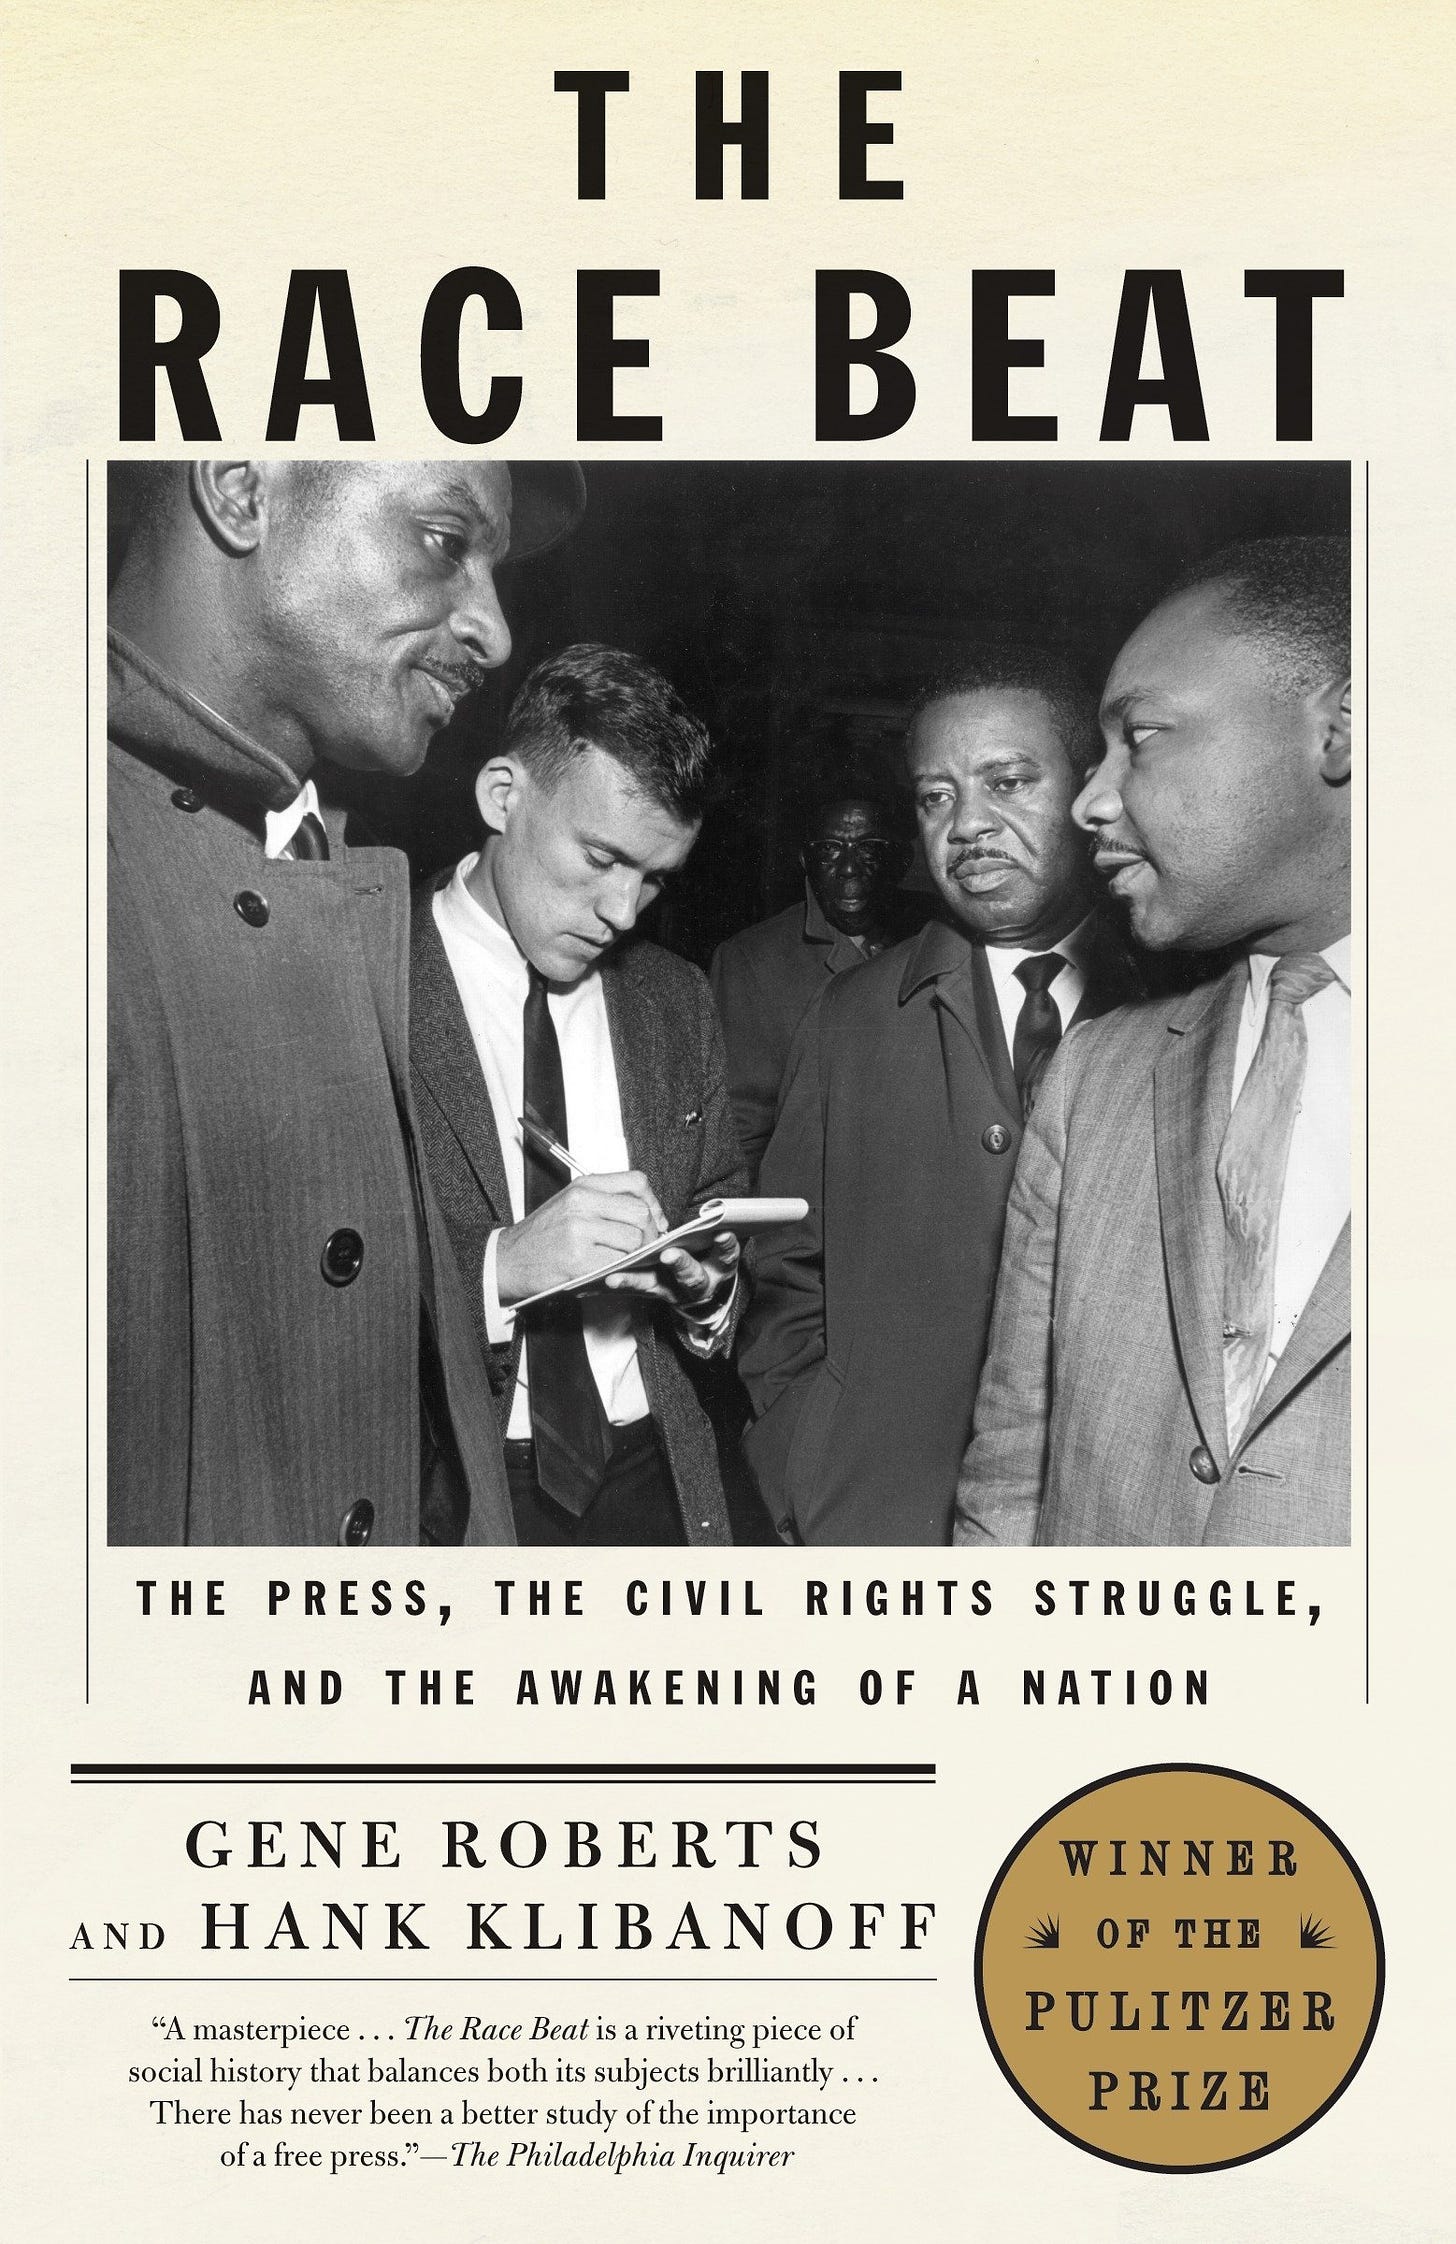 The cover of The Race Beat by Gene Roberts & Hank Klibanoff